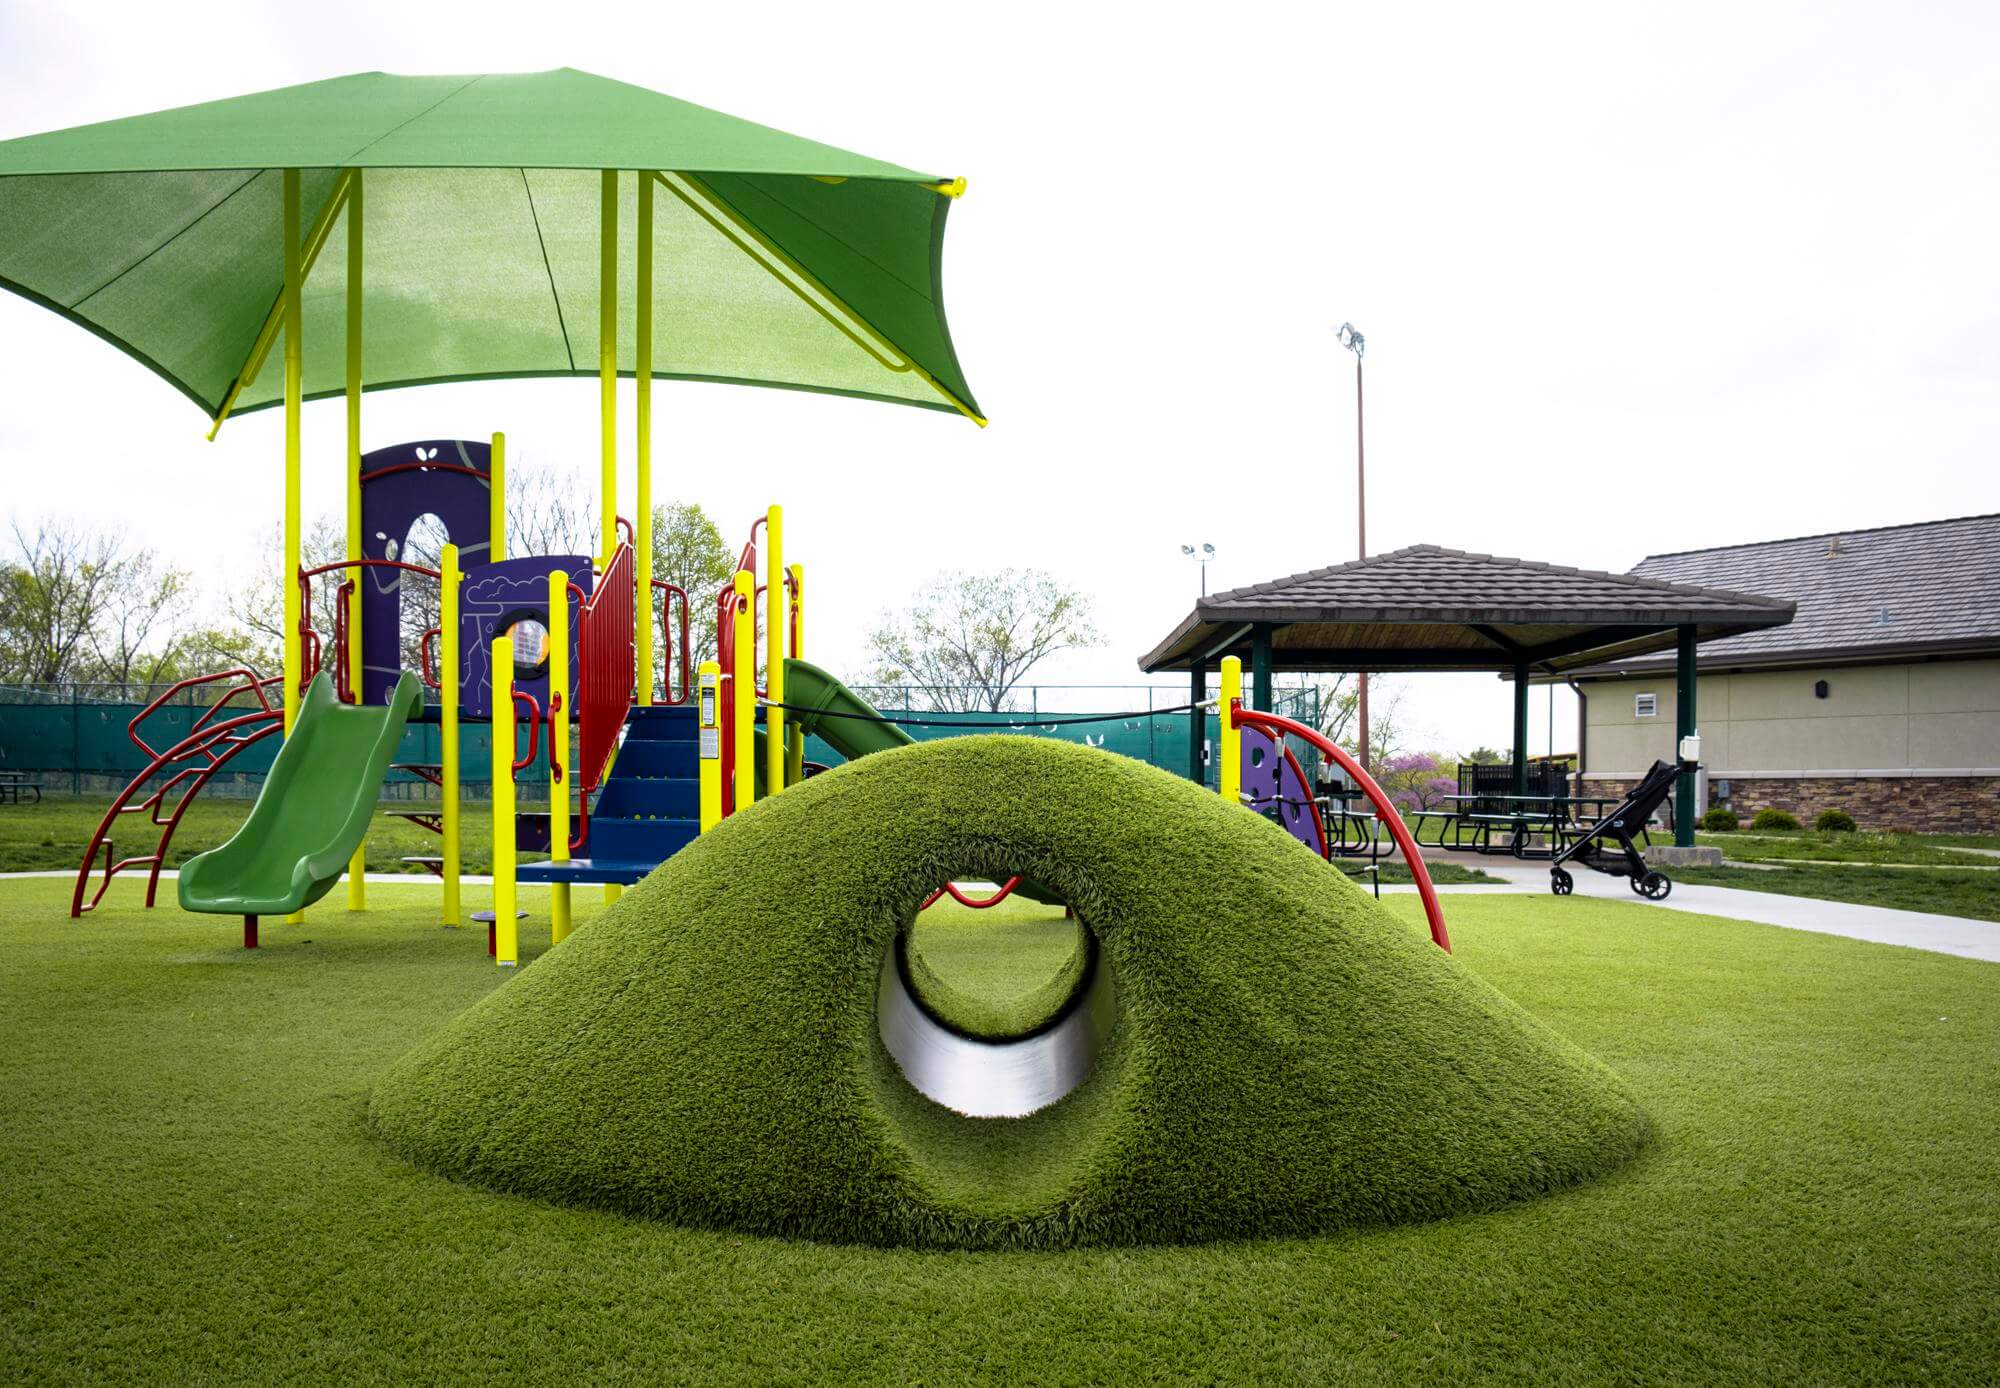 Colorful playground with vibrant play structures, oversized umbrella for shade, and tunnel turf mound.